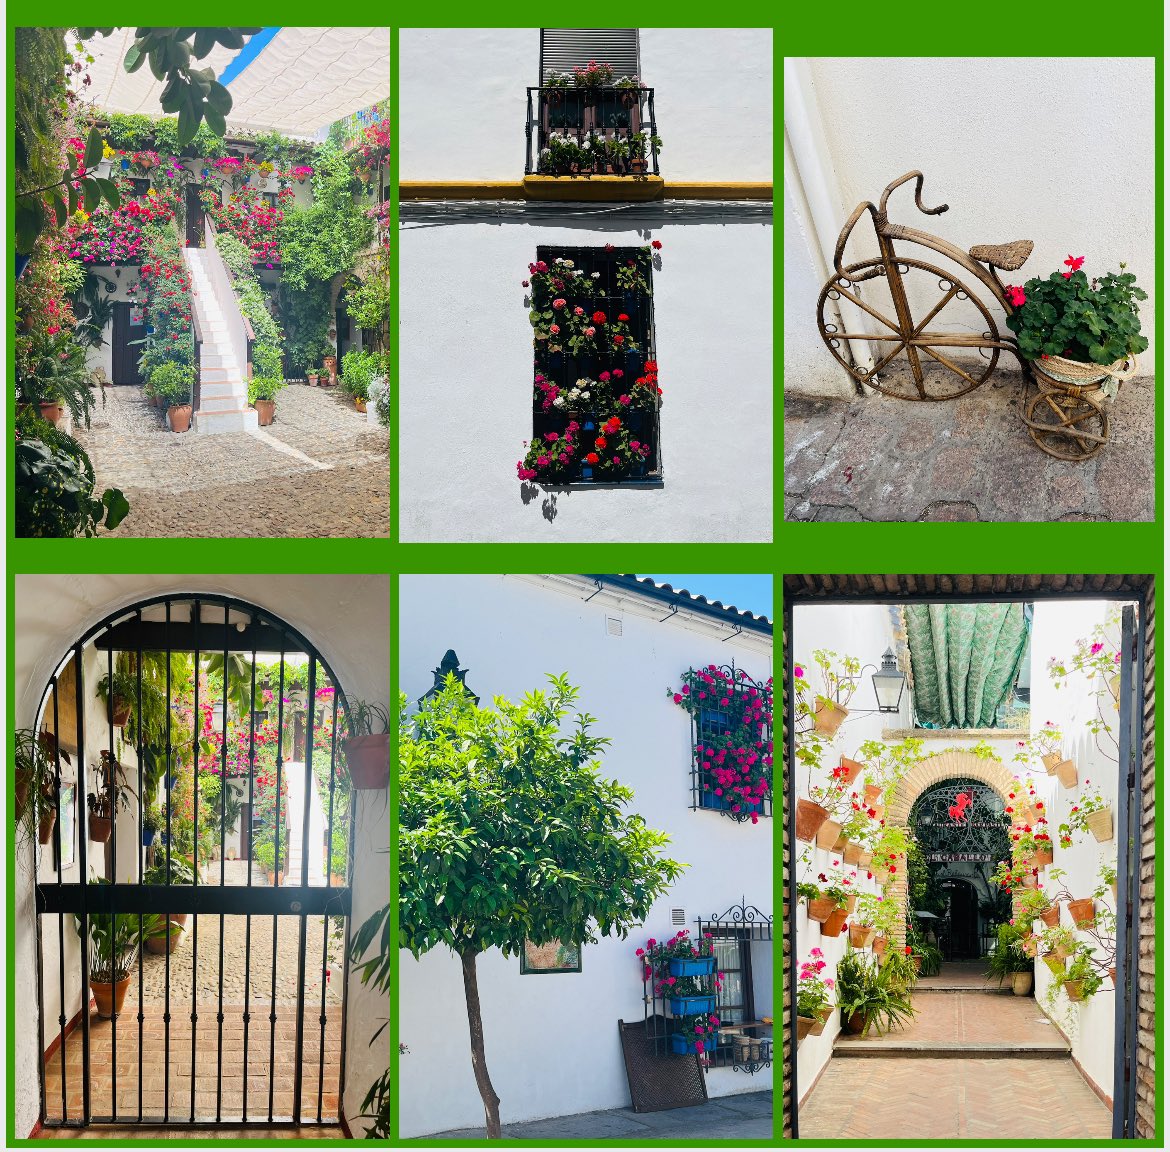 Just back from Córdoba and saw this - 50 years of floral patios 🌸🌼🌺💐just stunning 
#Flowers
#PatioCordobes 
Cordoba 24 | Patio Fest - Fiesta de los Patios 
cordoba24.info/english/html/p…